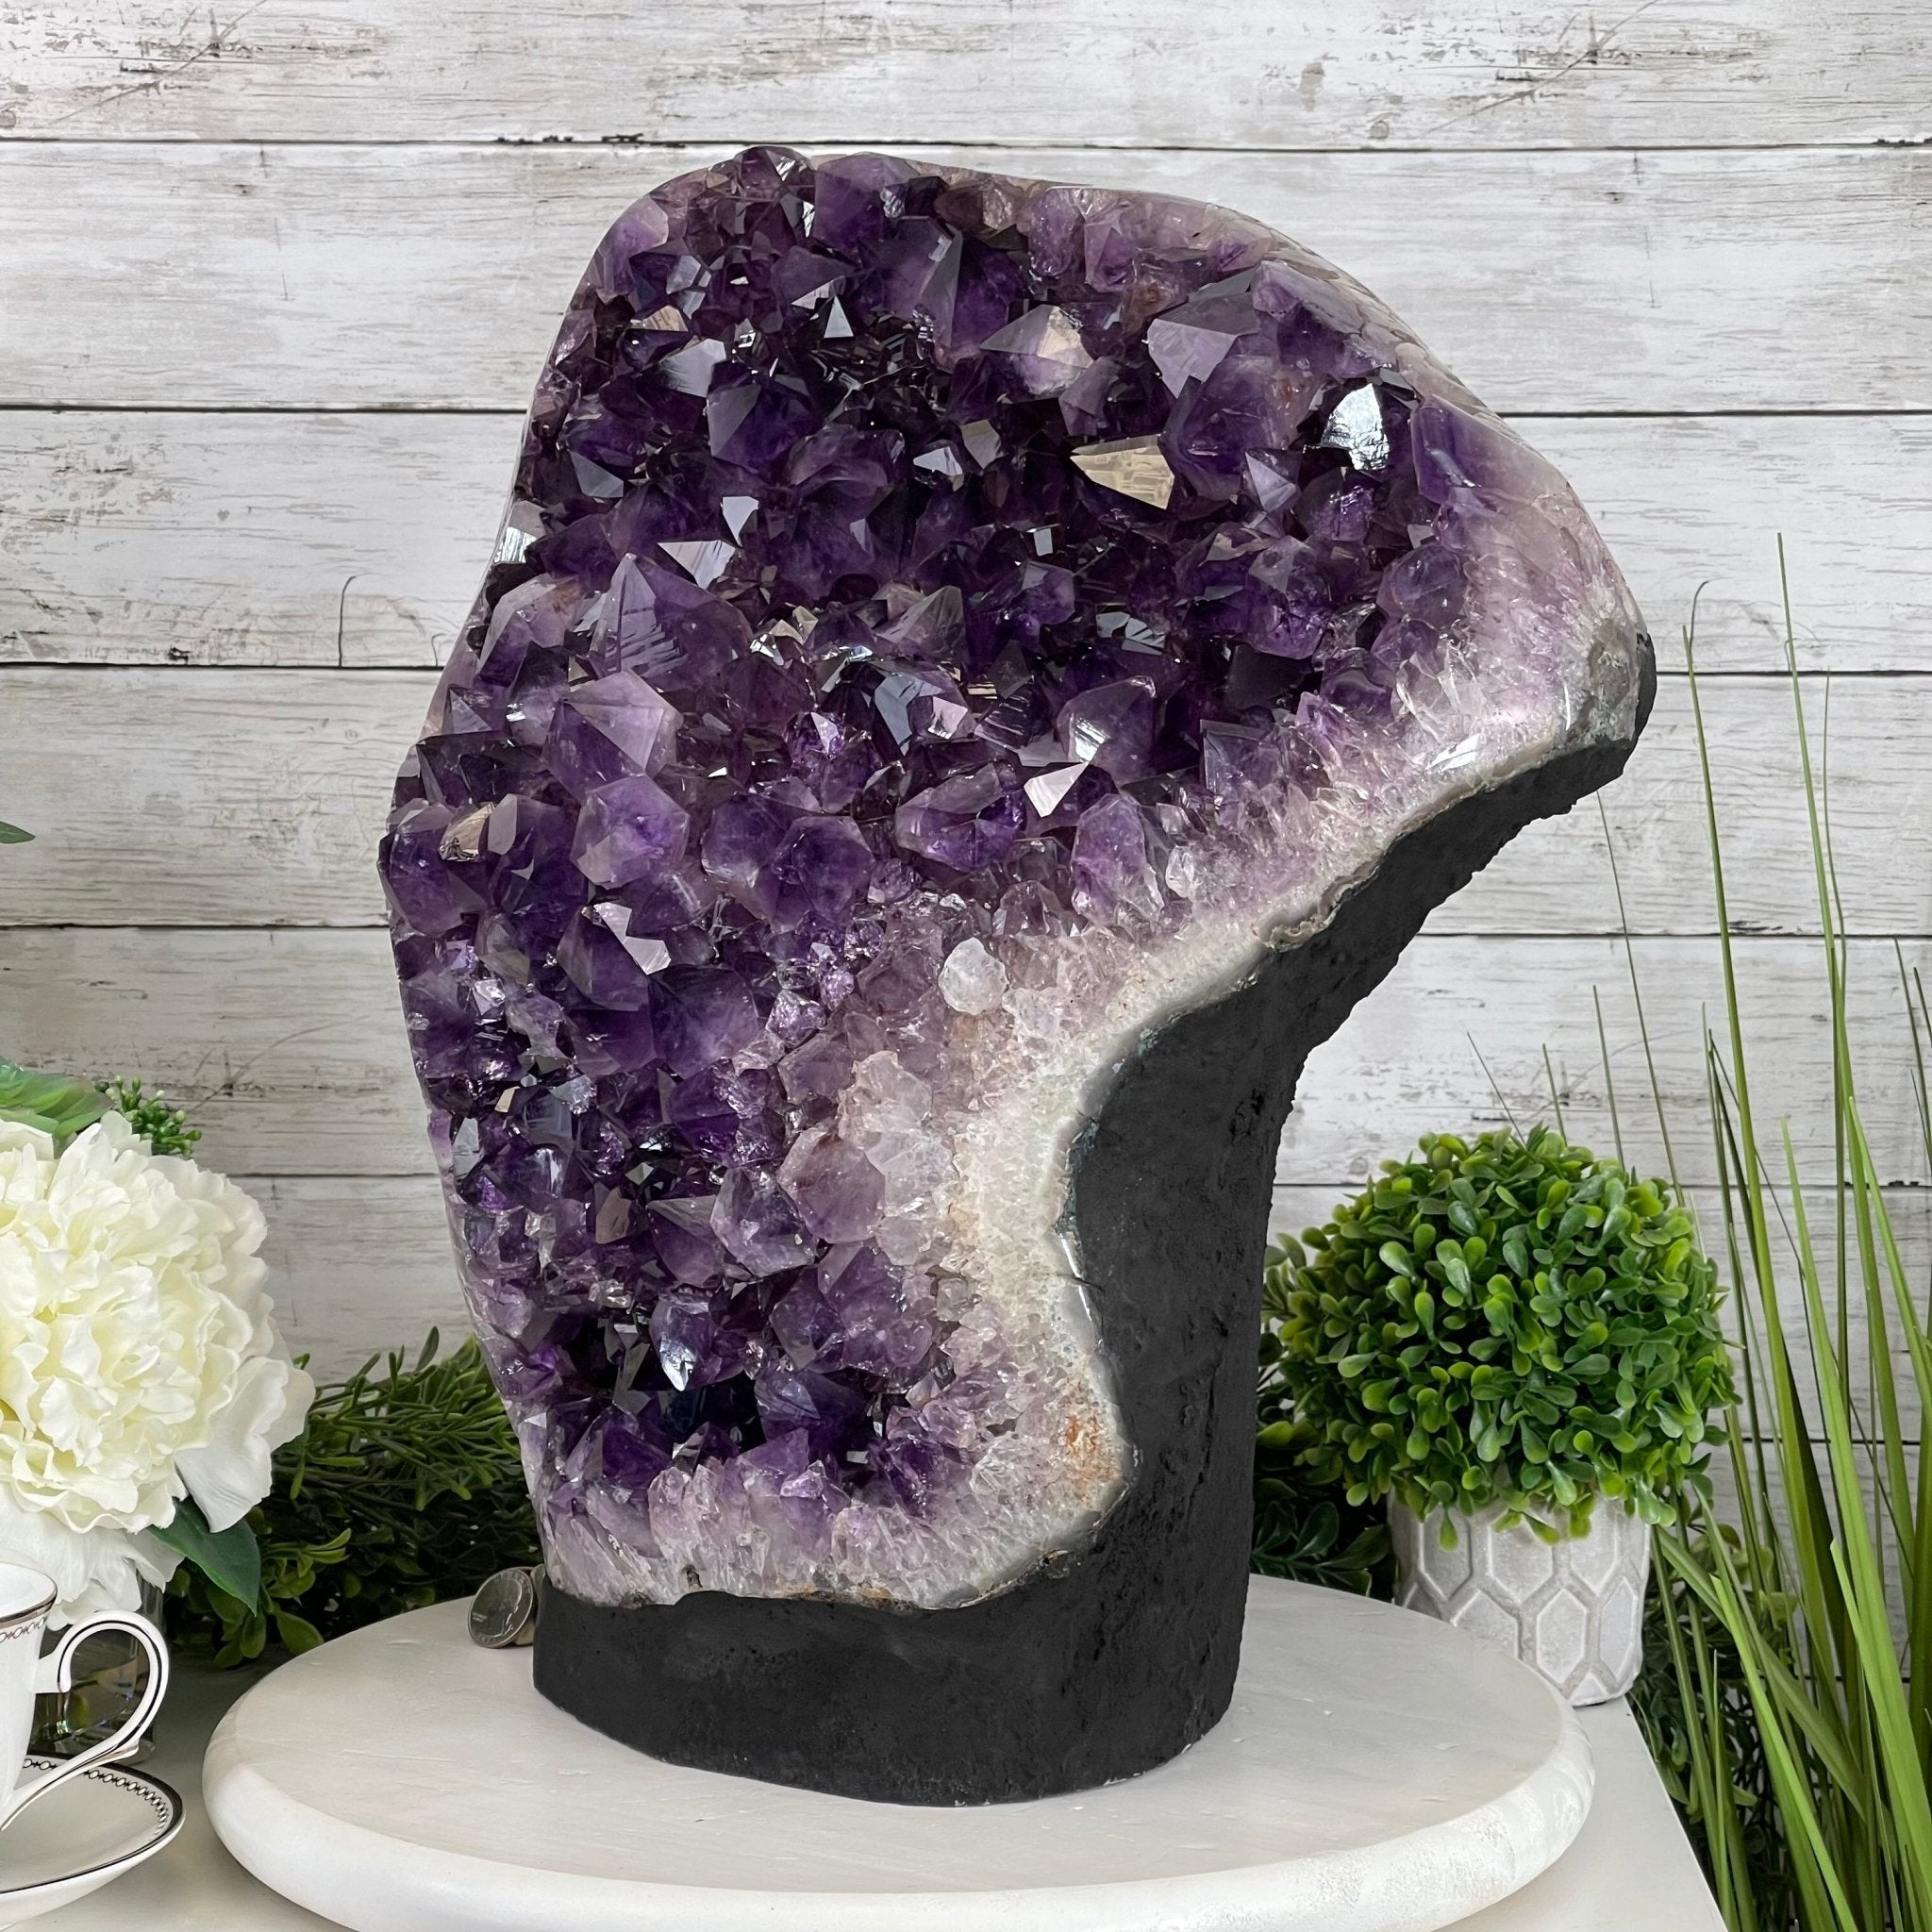 Extra Quality Amethyst Druse Cluster on Cement Base, 77.8 lbs and 16.7" Tall #5614-0062 - Brazil GemsBrazil GemsExtra Quality Amethyst Druse Cluster on Cement Base, 77.8 lbs and 16.7" Tall #5614-0062Clusters on Cement Bases5614-0062